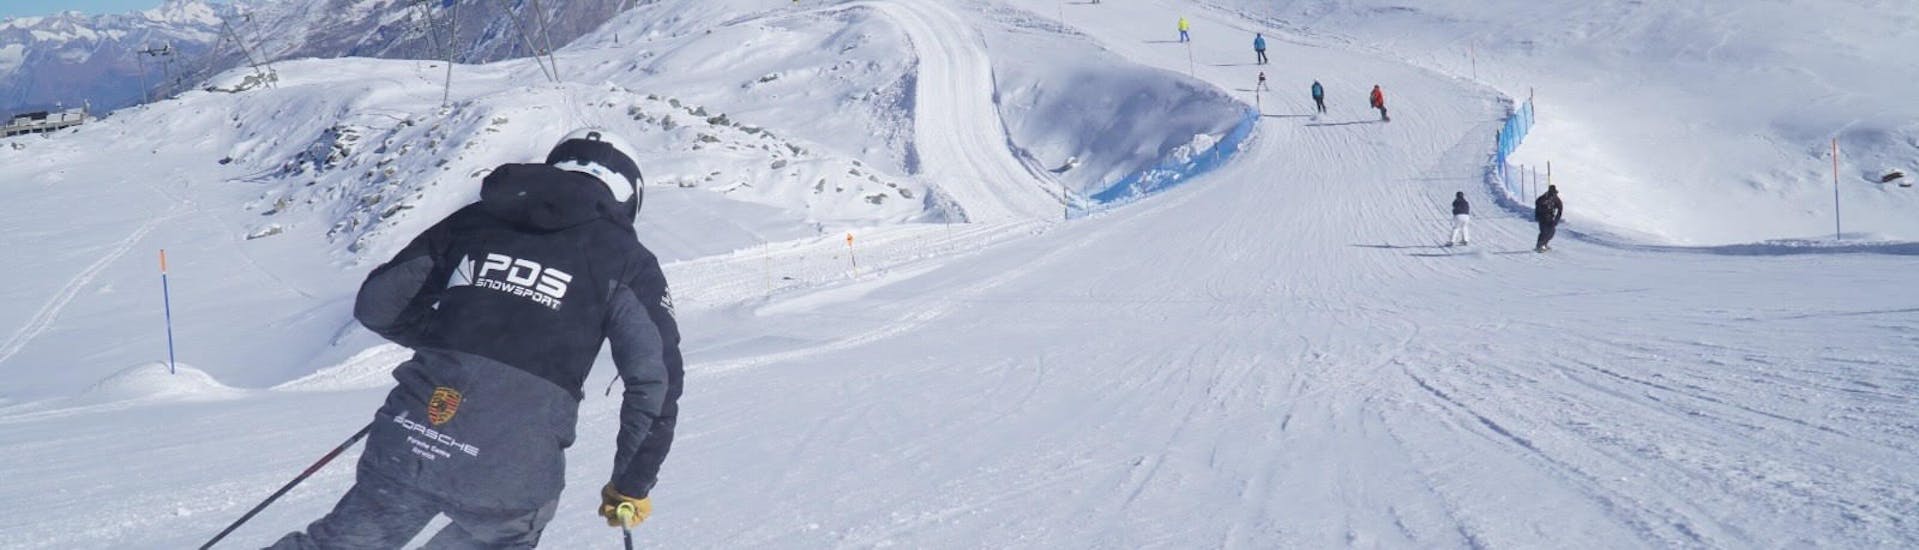 A skier races down the slope during his teens ski lessons for all levels with the PDS Snowsports ski school in Champéry.